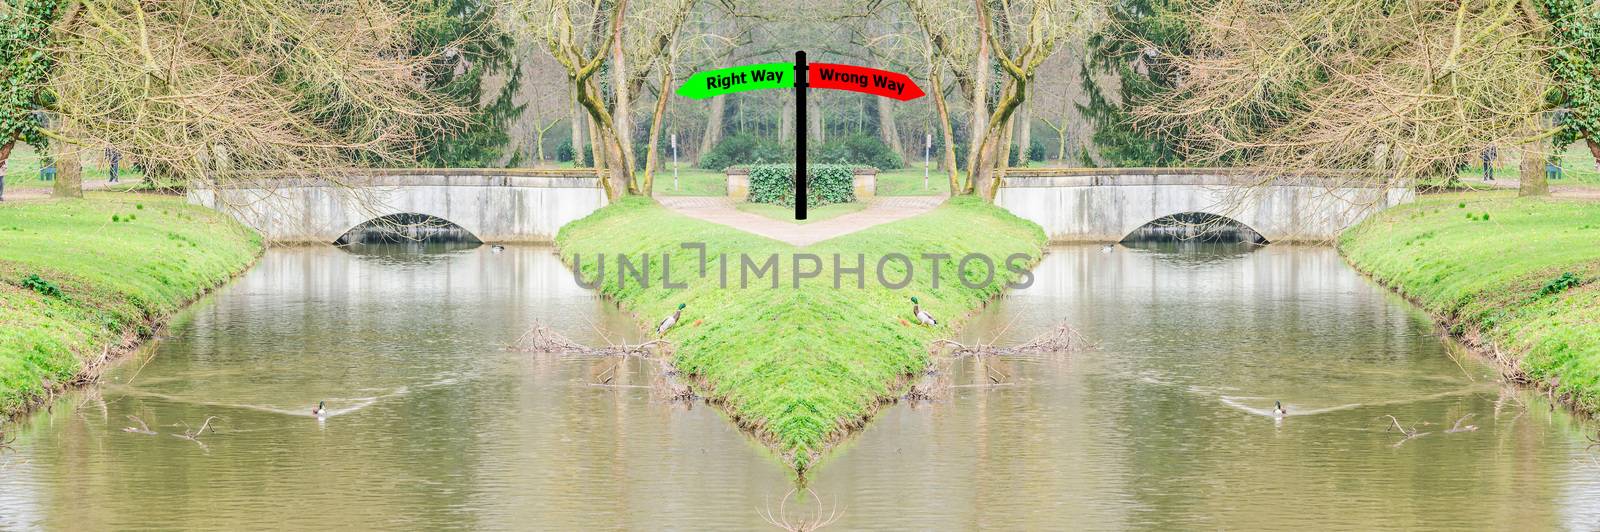 Two small concrete bridge over a moat divided by an island.
Symbolizes, find the correct path.